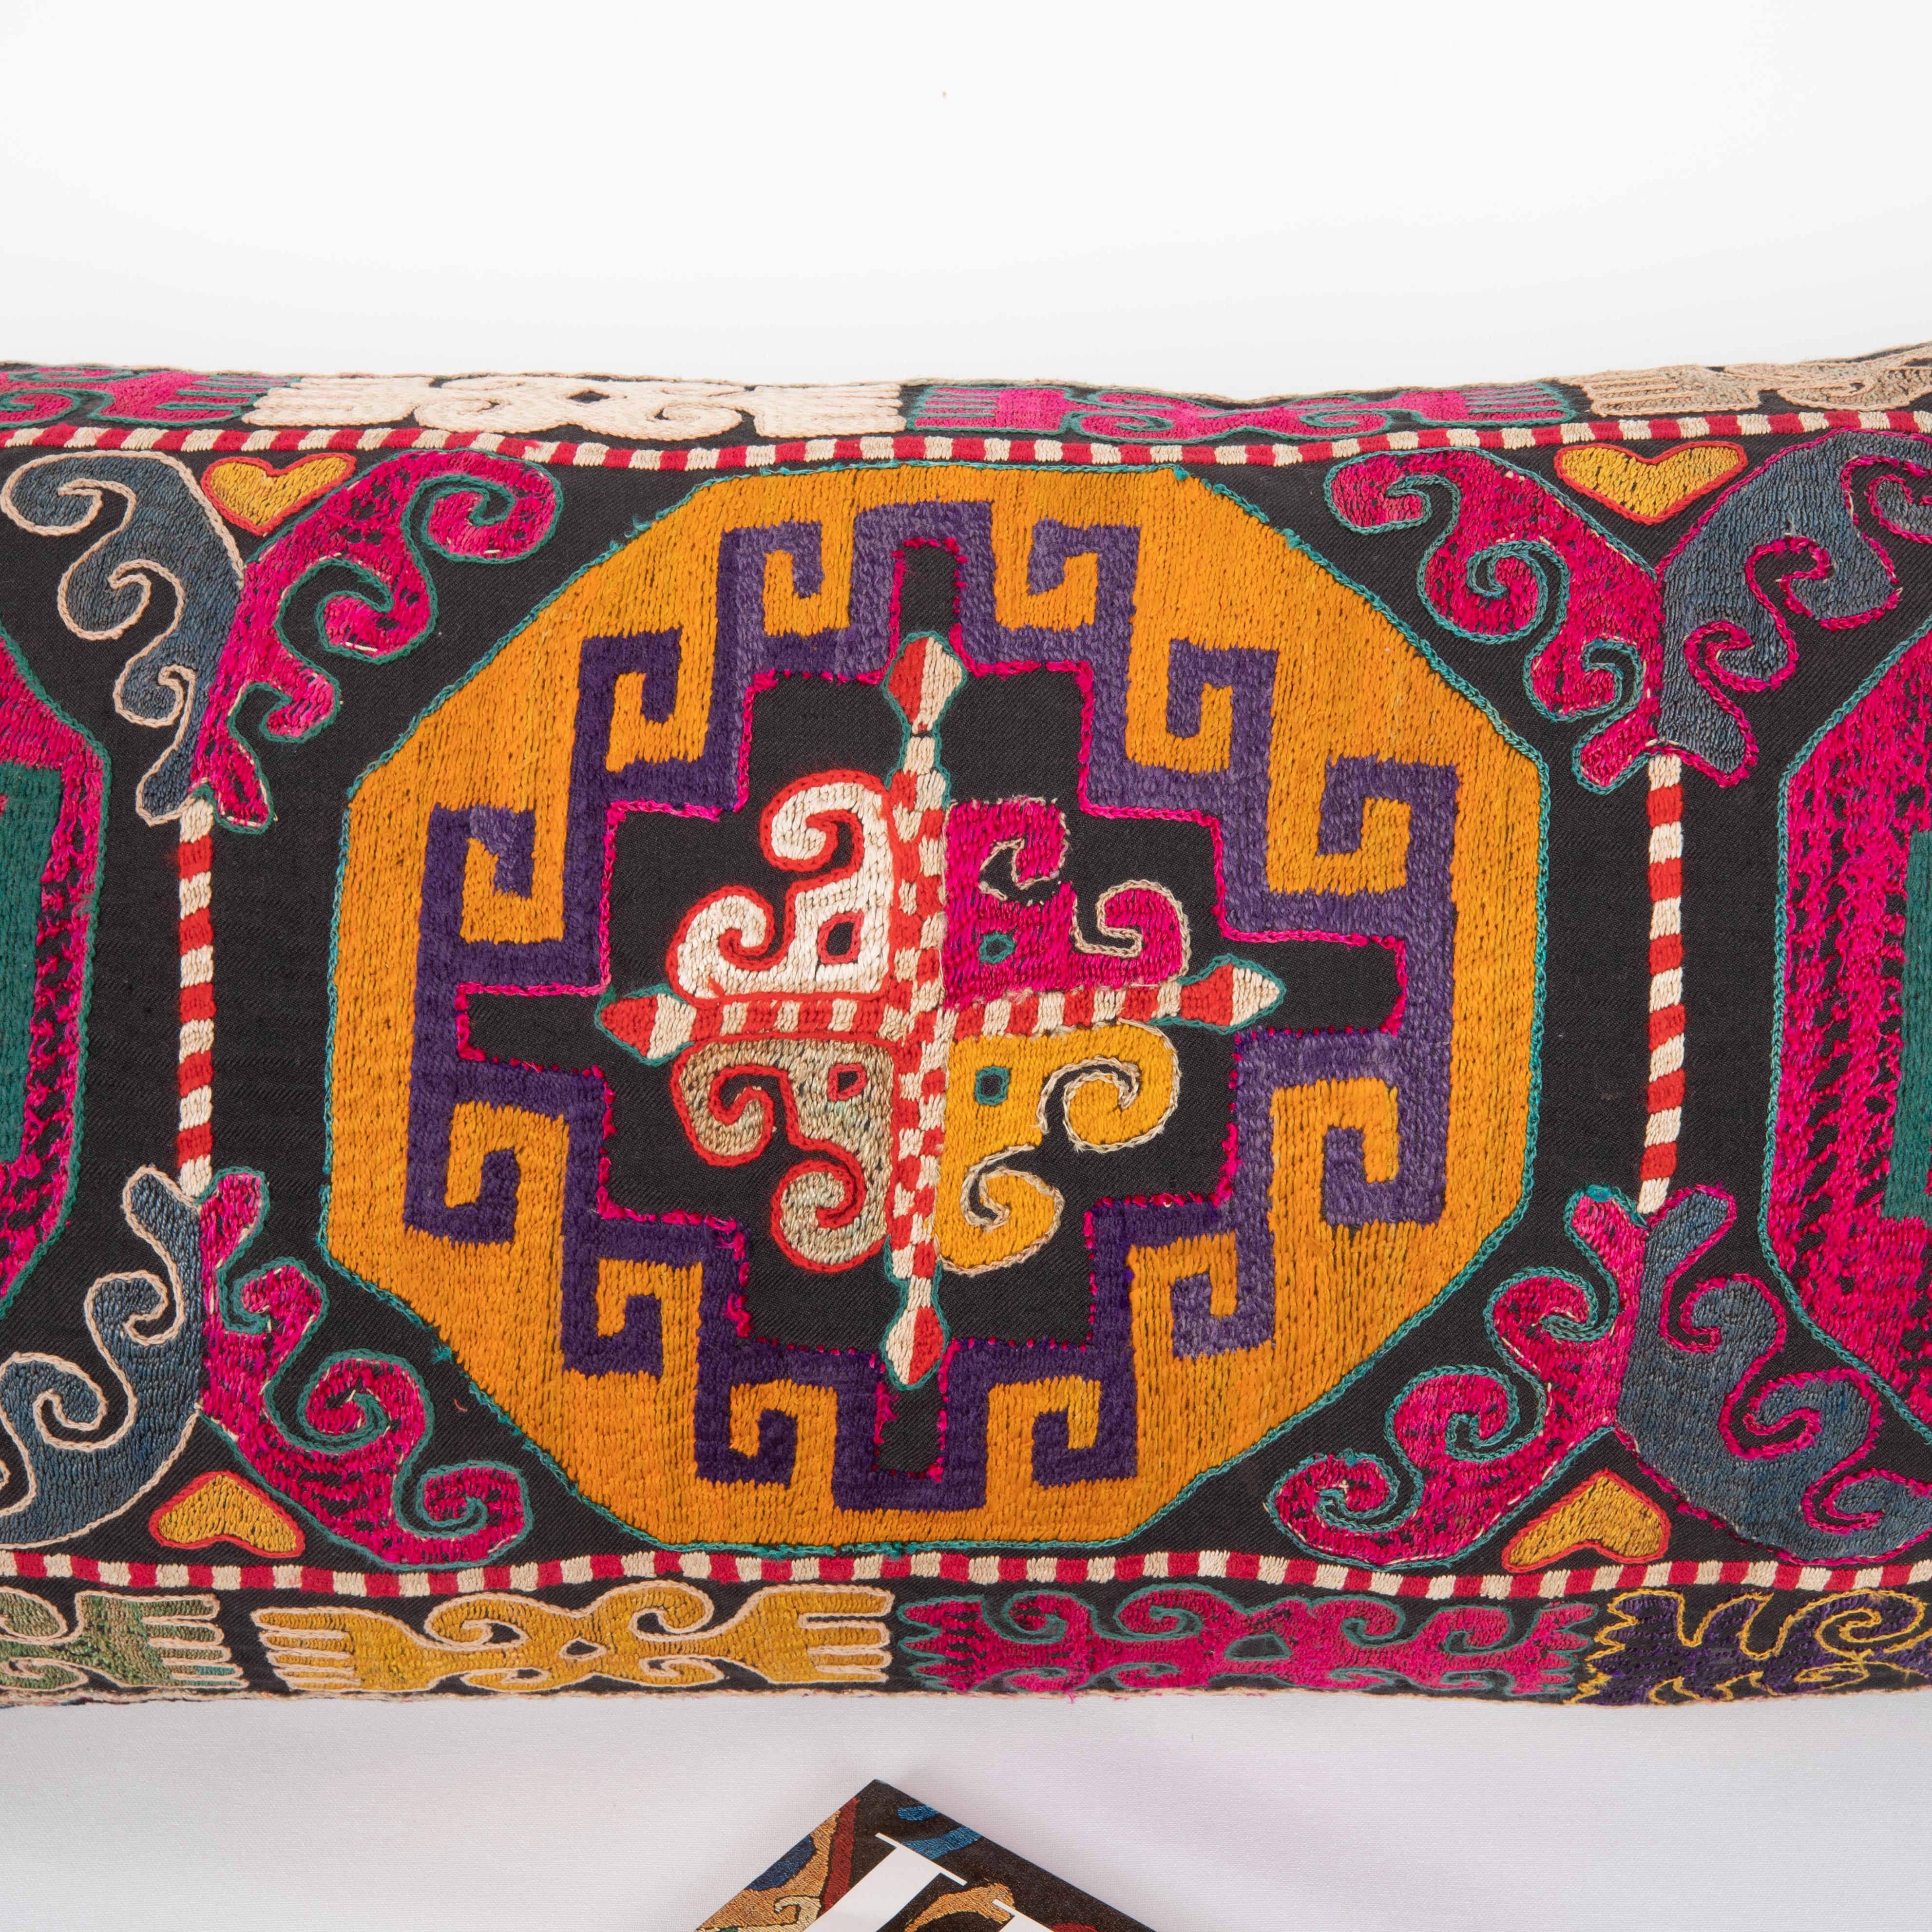 Embroidered Pillow Cover, Made from a 1970s/80s silk mafrash ( storage bag ) Panels For Sale